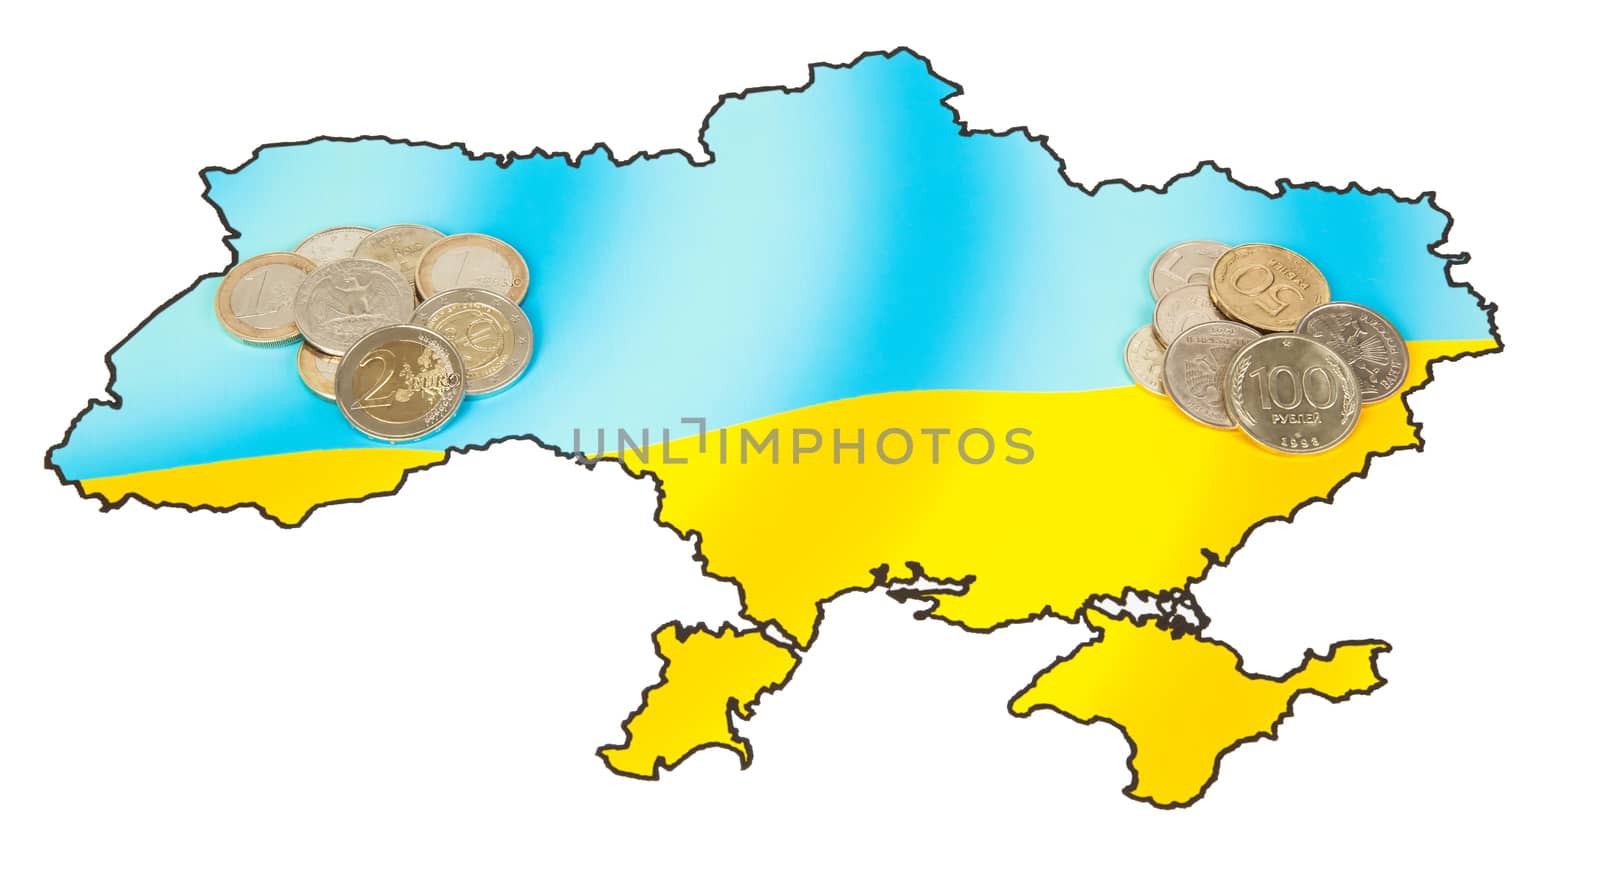 Coins on ukrainian map concept by RawGroup